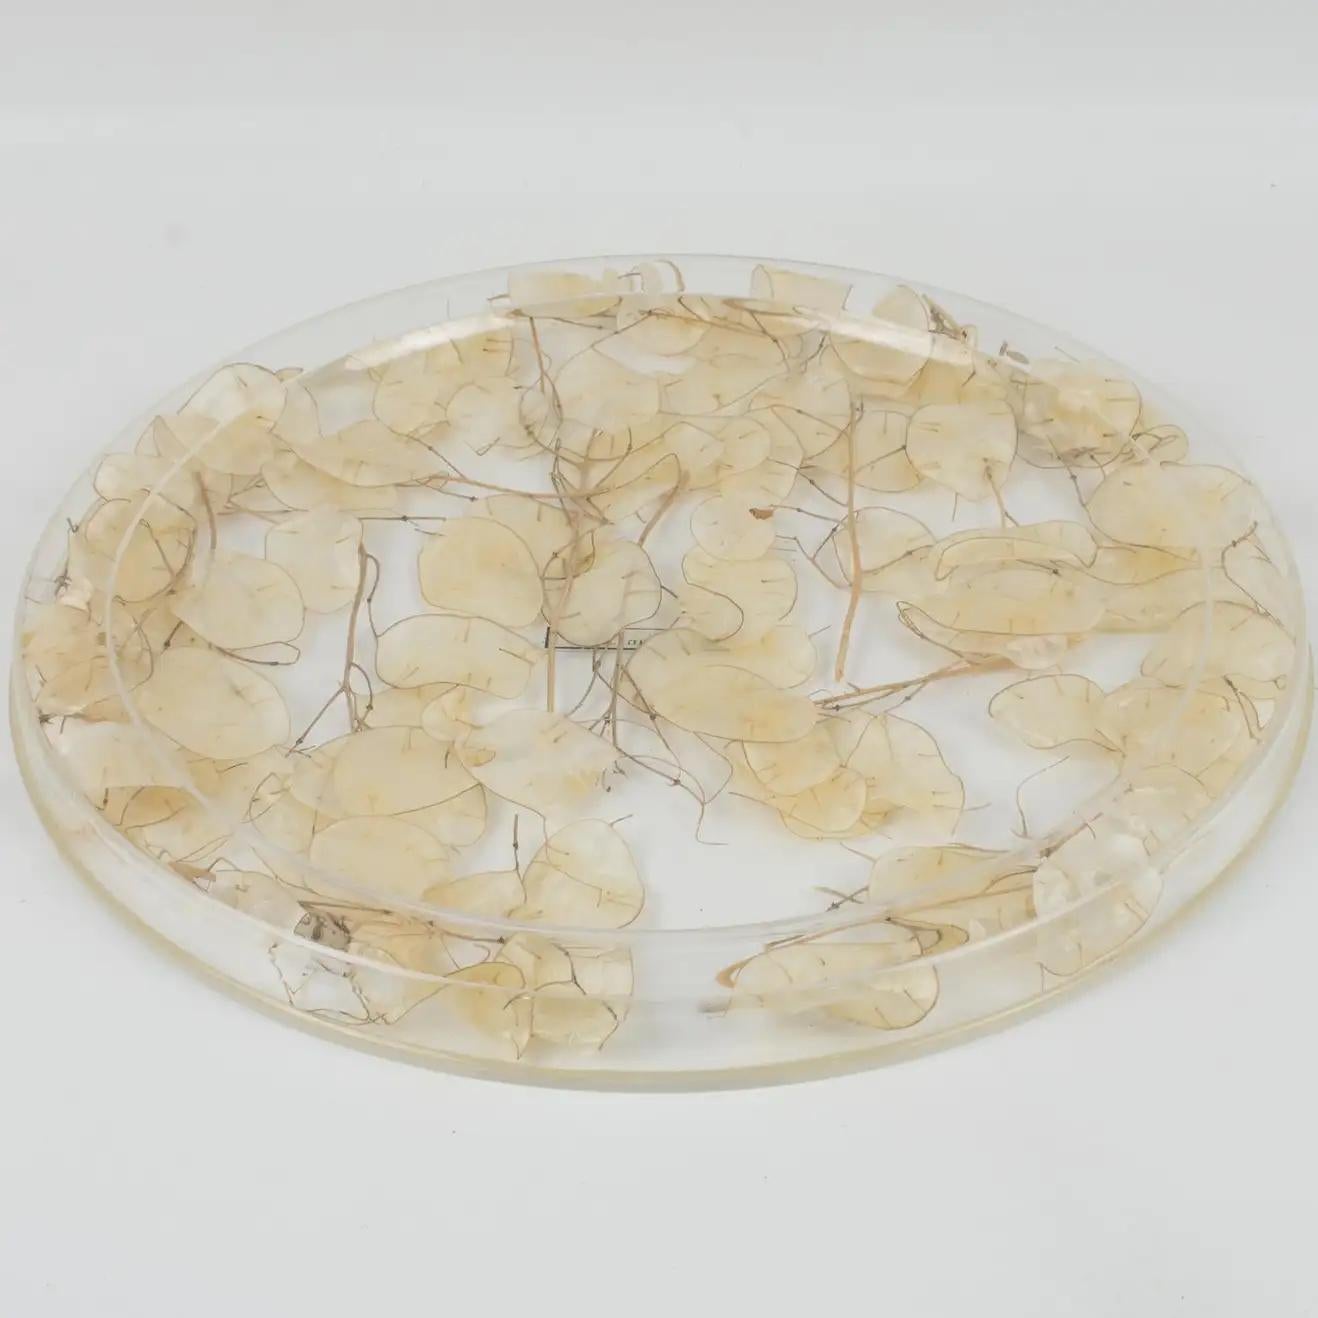 This is a lovely serving tray designed by Christian Dior in the 1970s for his Home Collection. This board or platter has a rounded shape and raised edges. With a natural organic touch, it is made of clear Lucite or plexiglass with real dried Lunaria